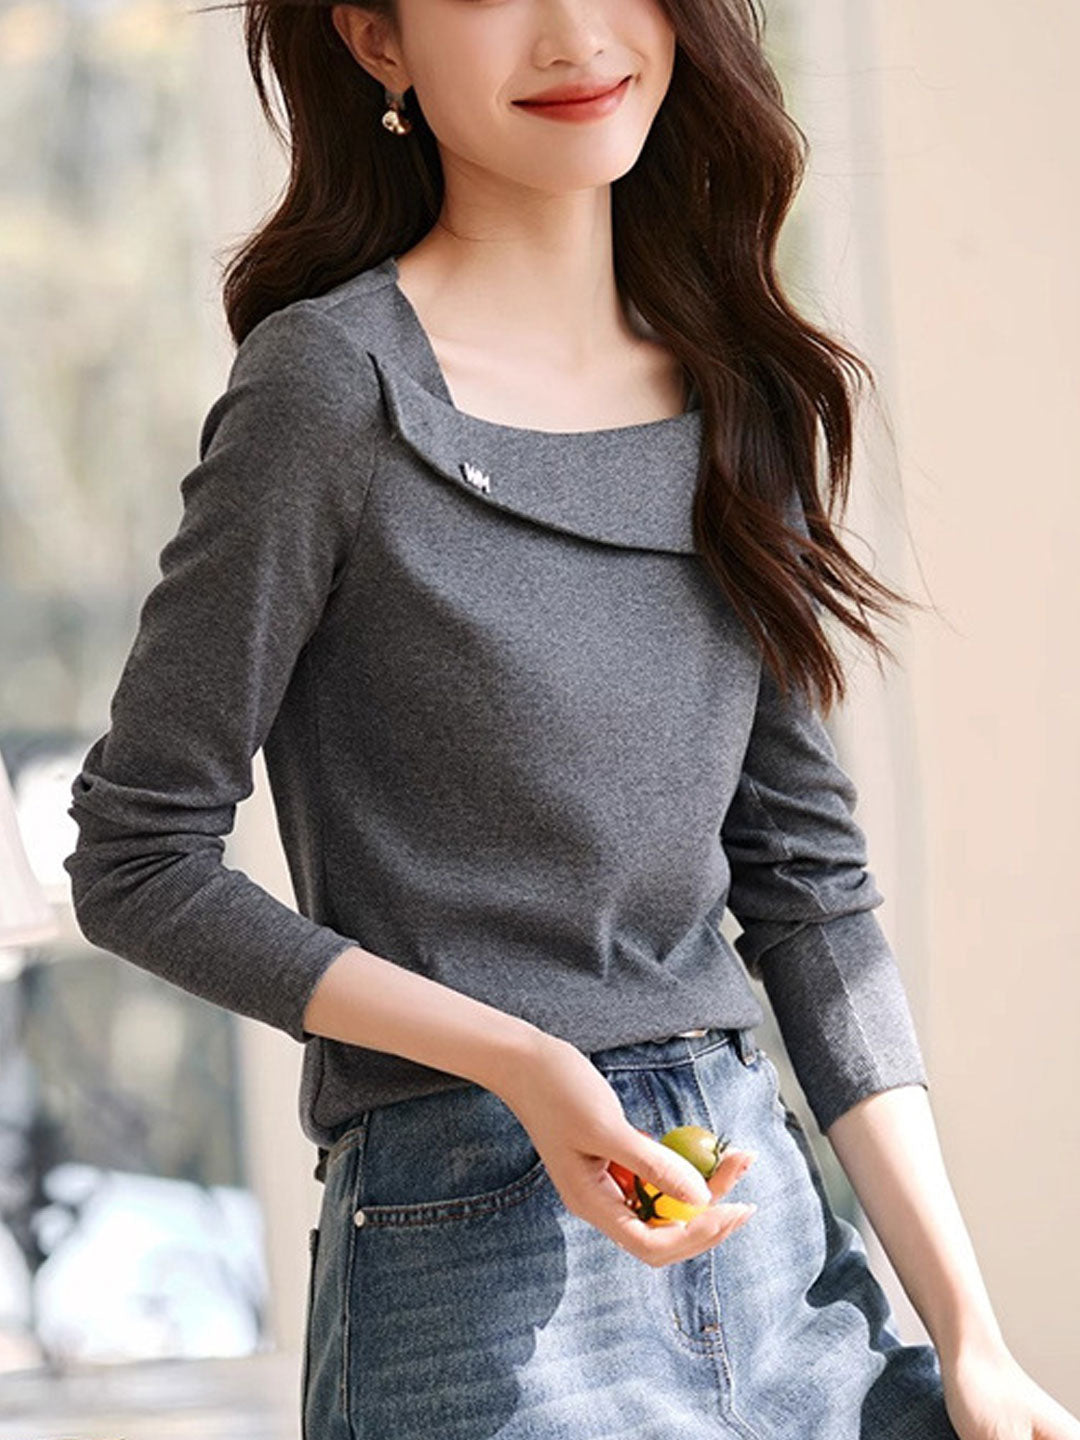 Ava Casual Square Neck Knitted Top